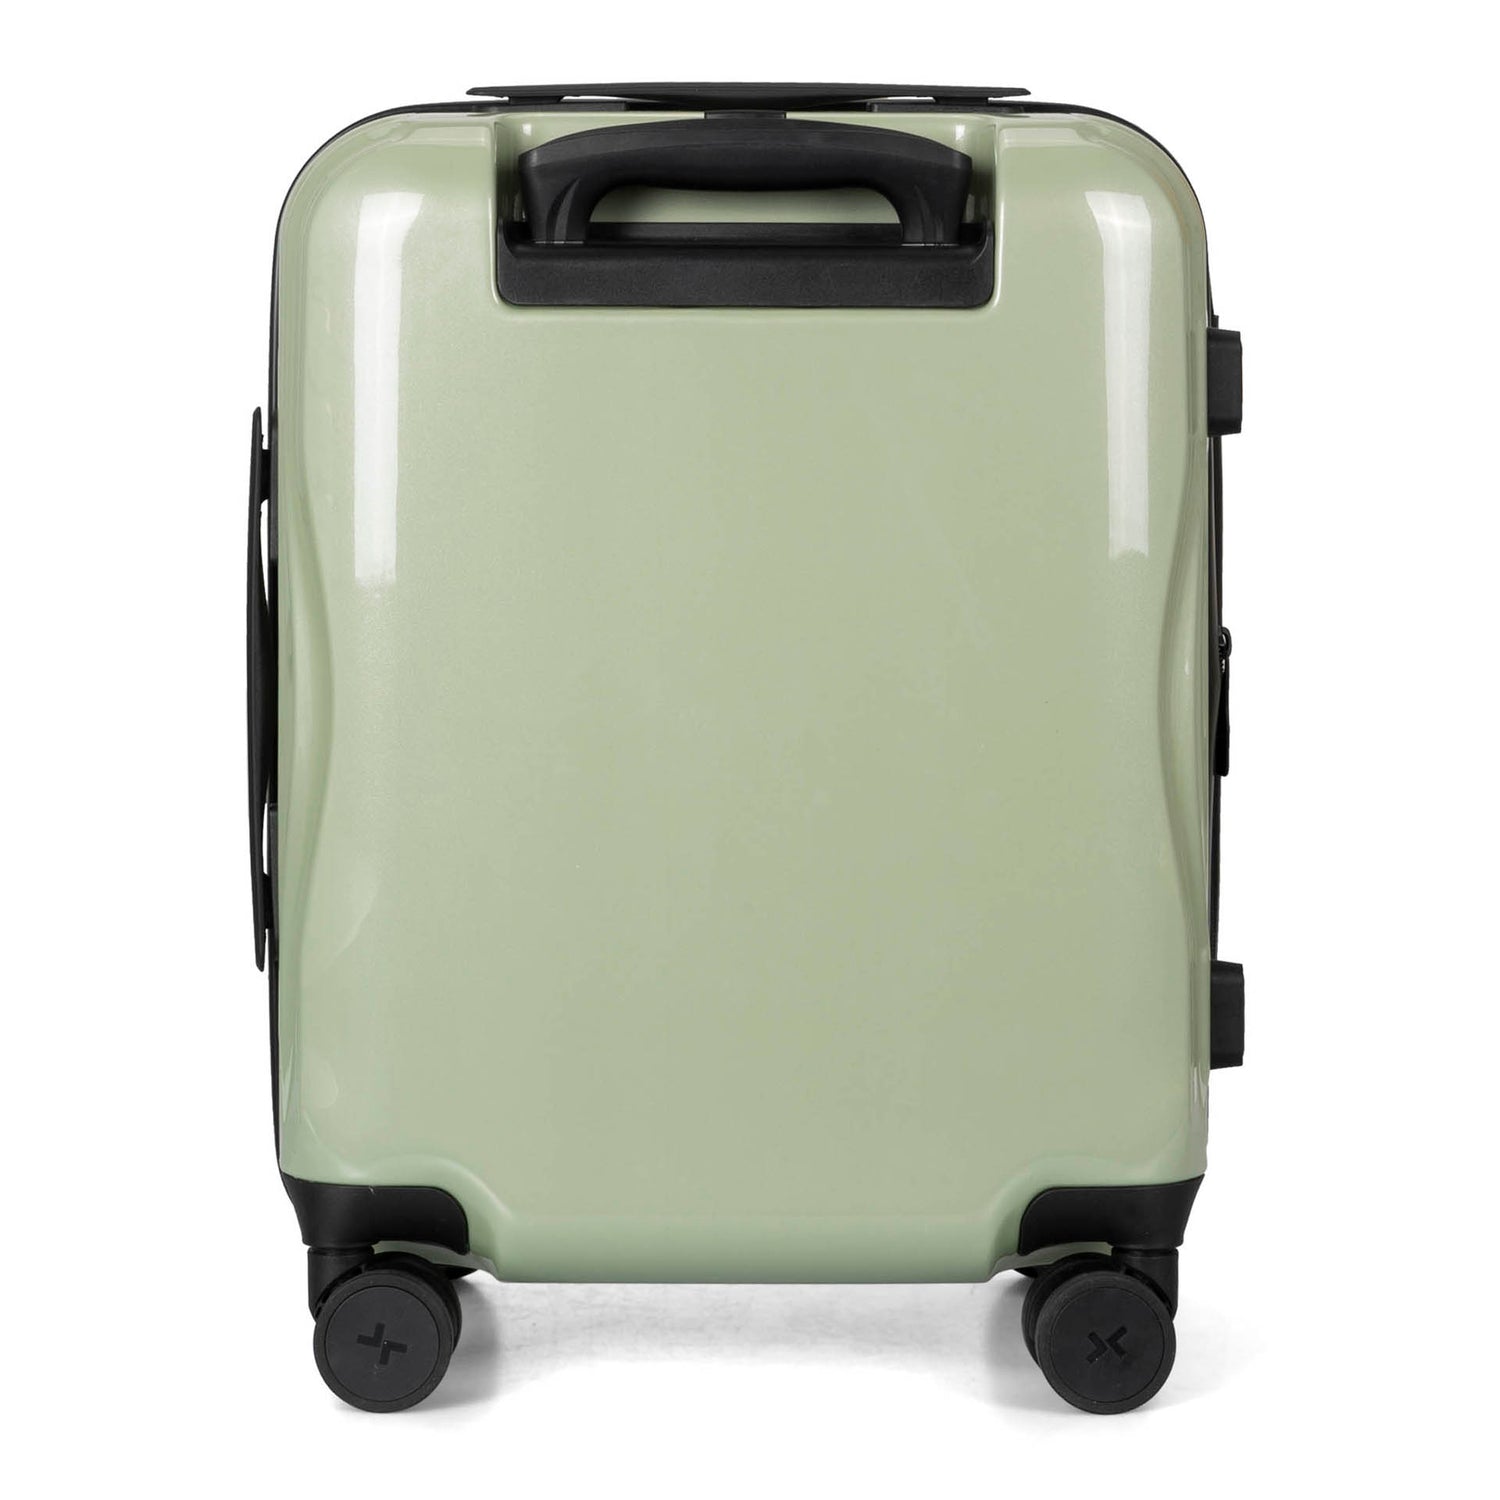 Capetown Hardside 19" Carry-On Luggage - Bentley